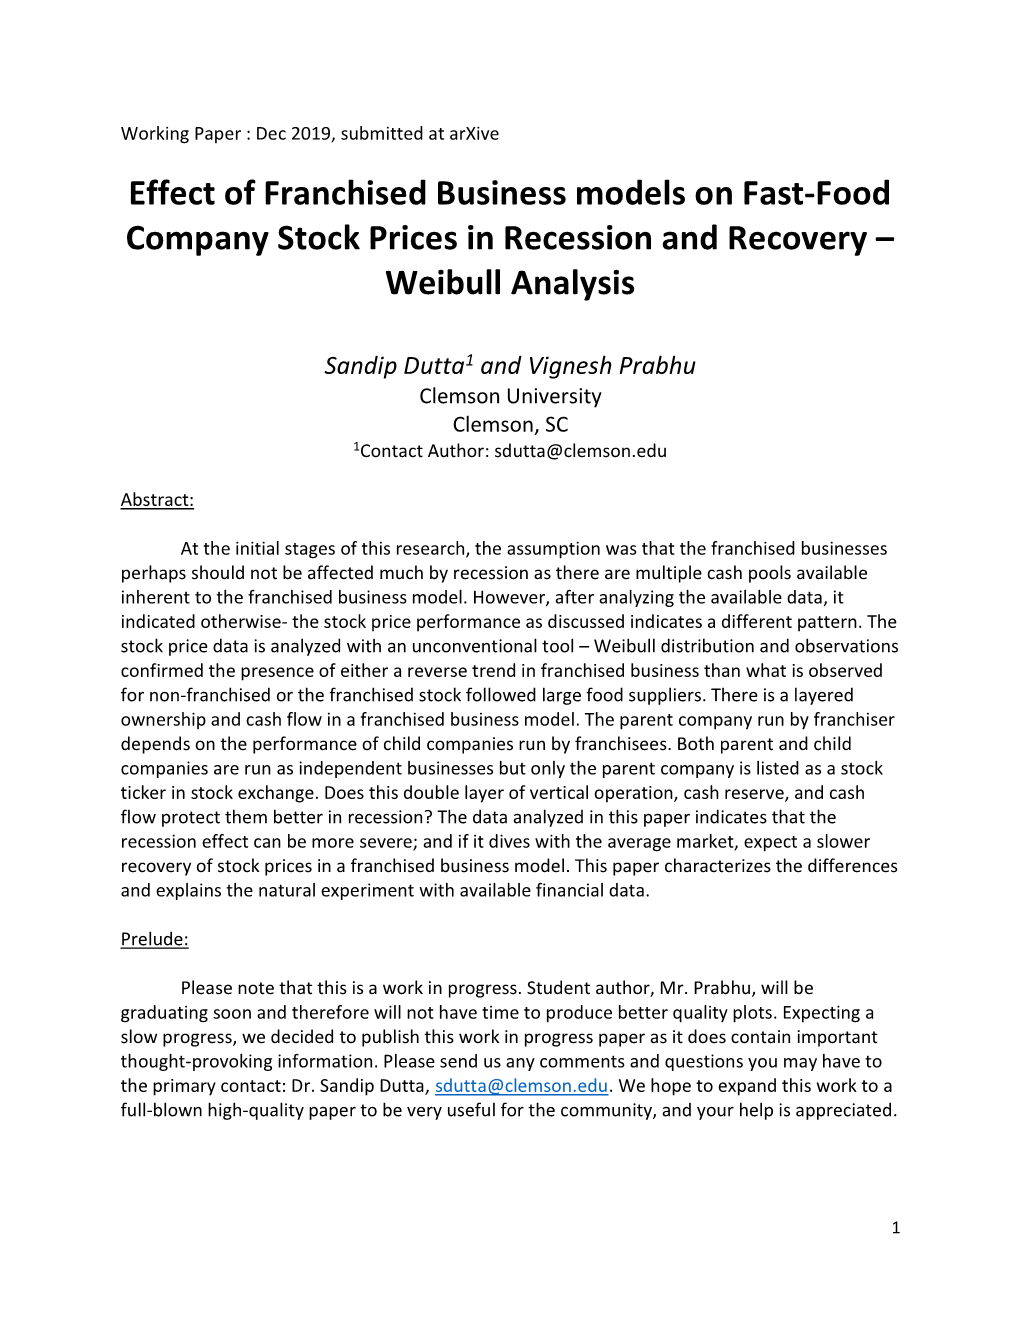 Effect of Franchised Business Models on Fast-Food Company Stock Prices in Recession and Recovery – Weibull Analysis